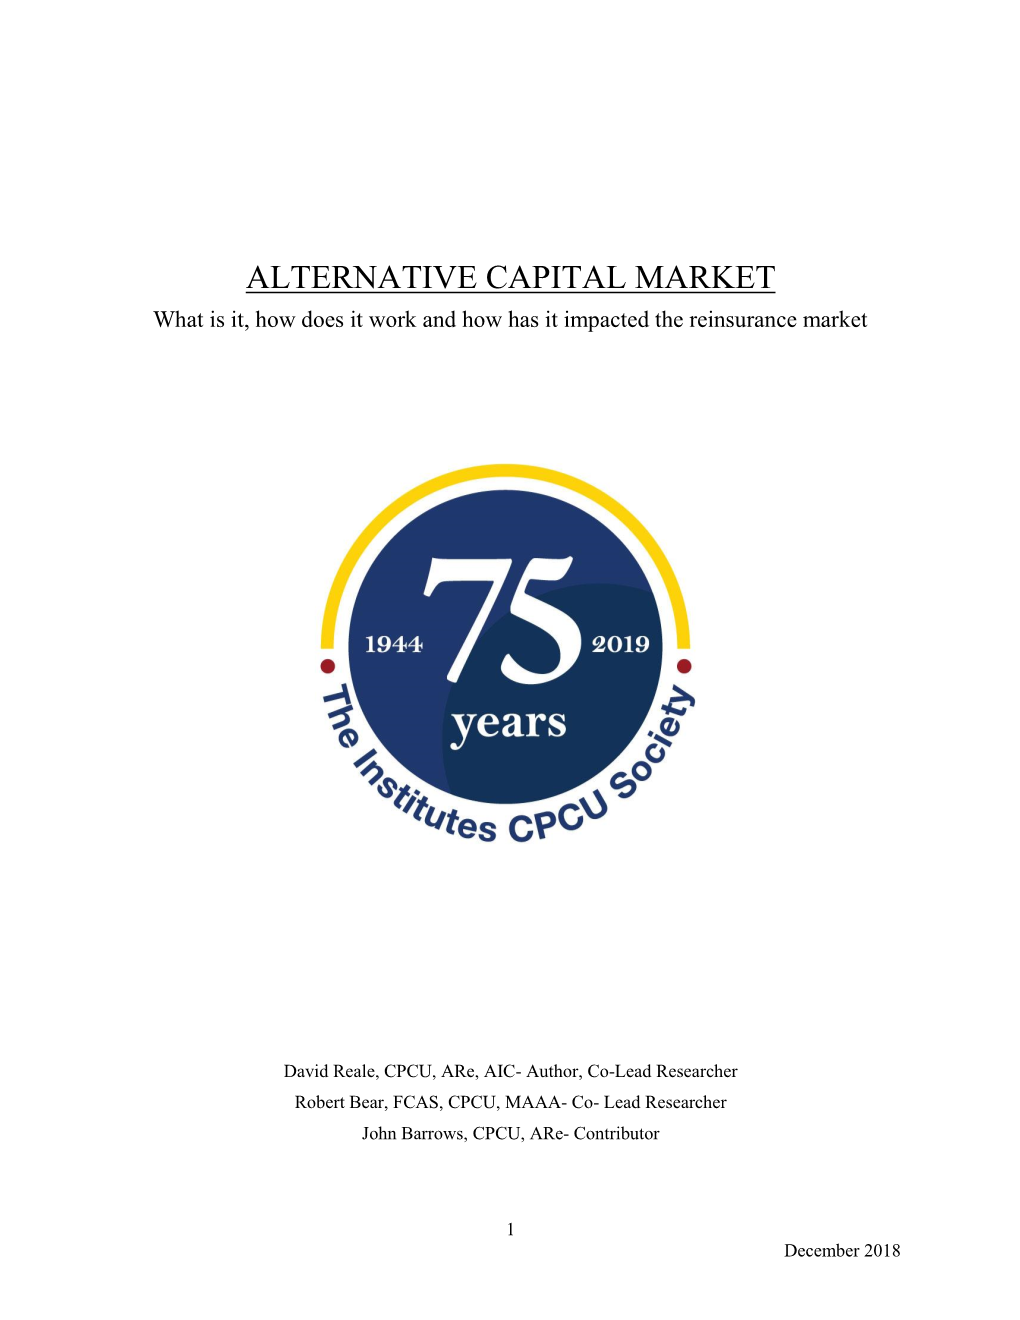 ALTERNATIVE CAPITAL MARKET What Is It, How Does It Work and How Has It Impacted the Reinsurance Market